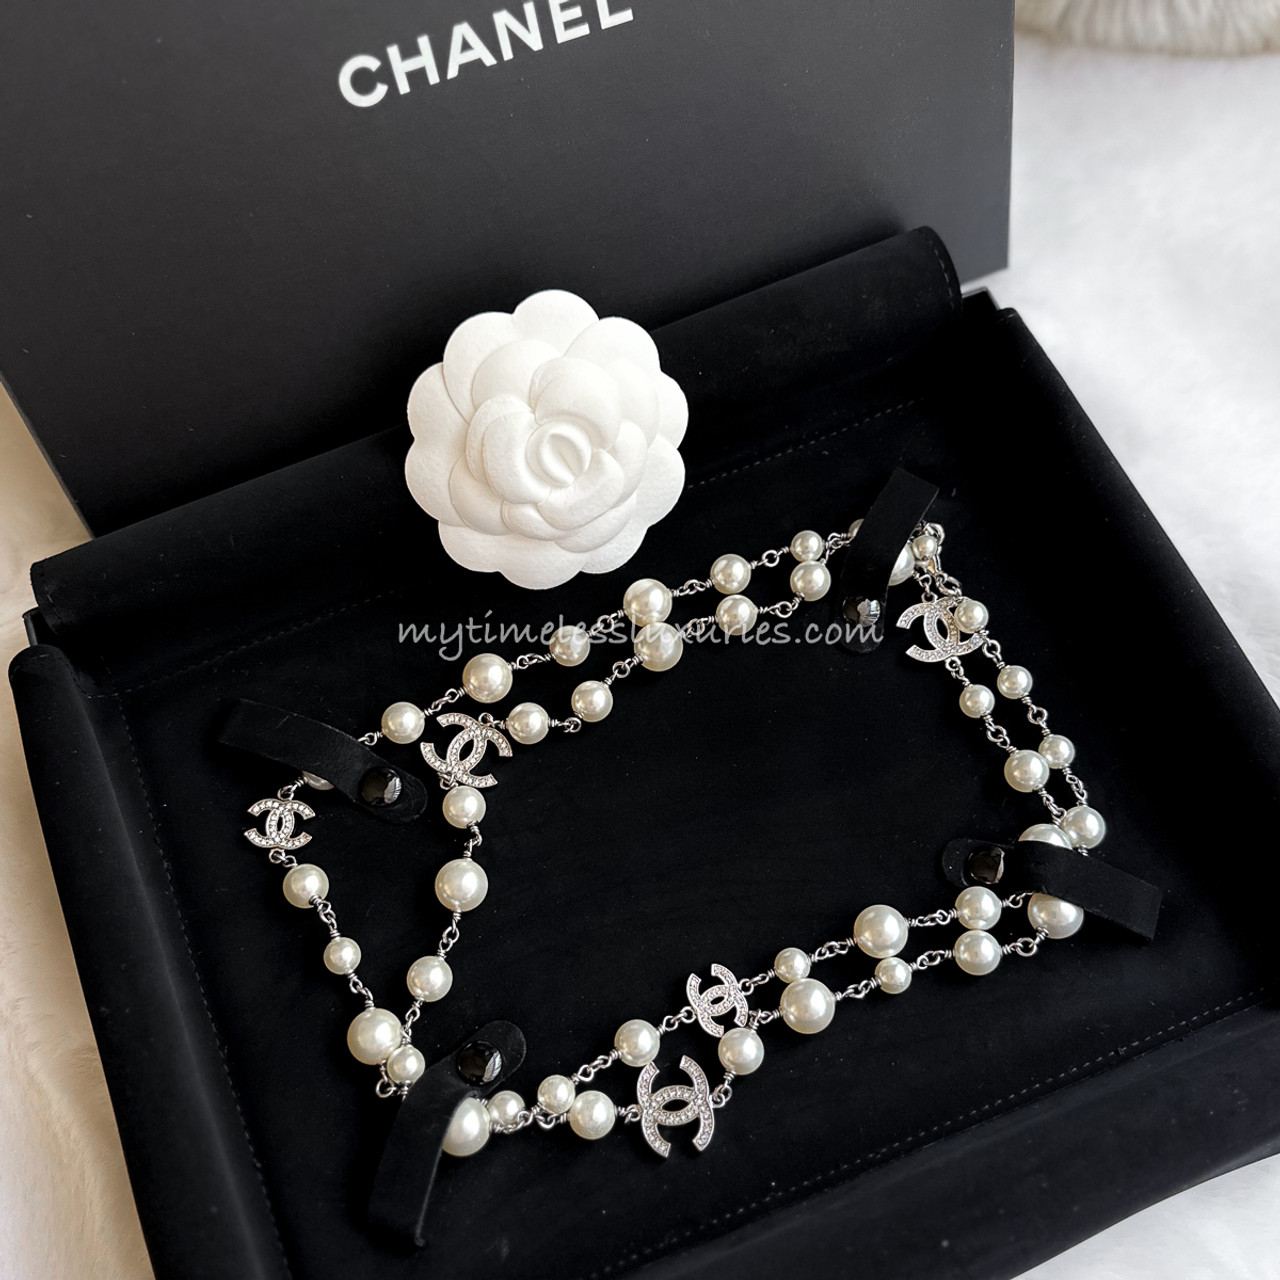 Chanel Faux Pearl Double Crystal CC Choker Necklace - Yoogi's Closet